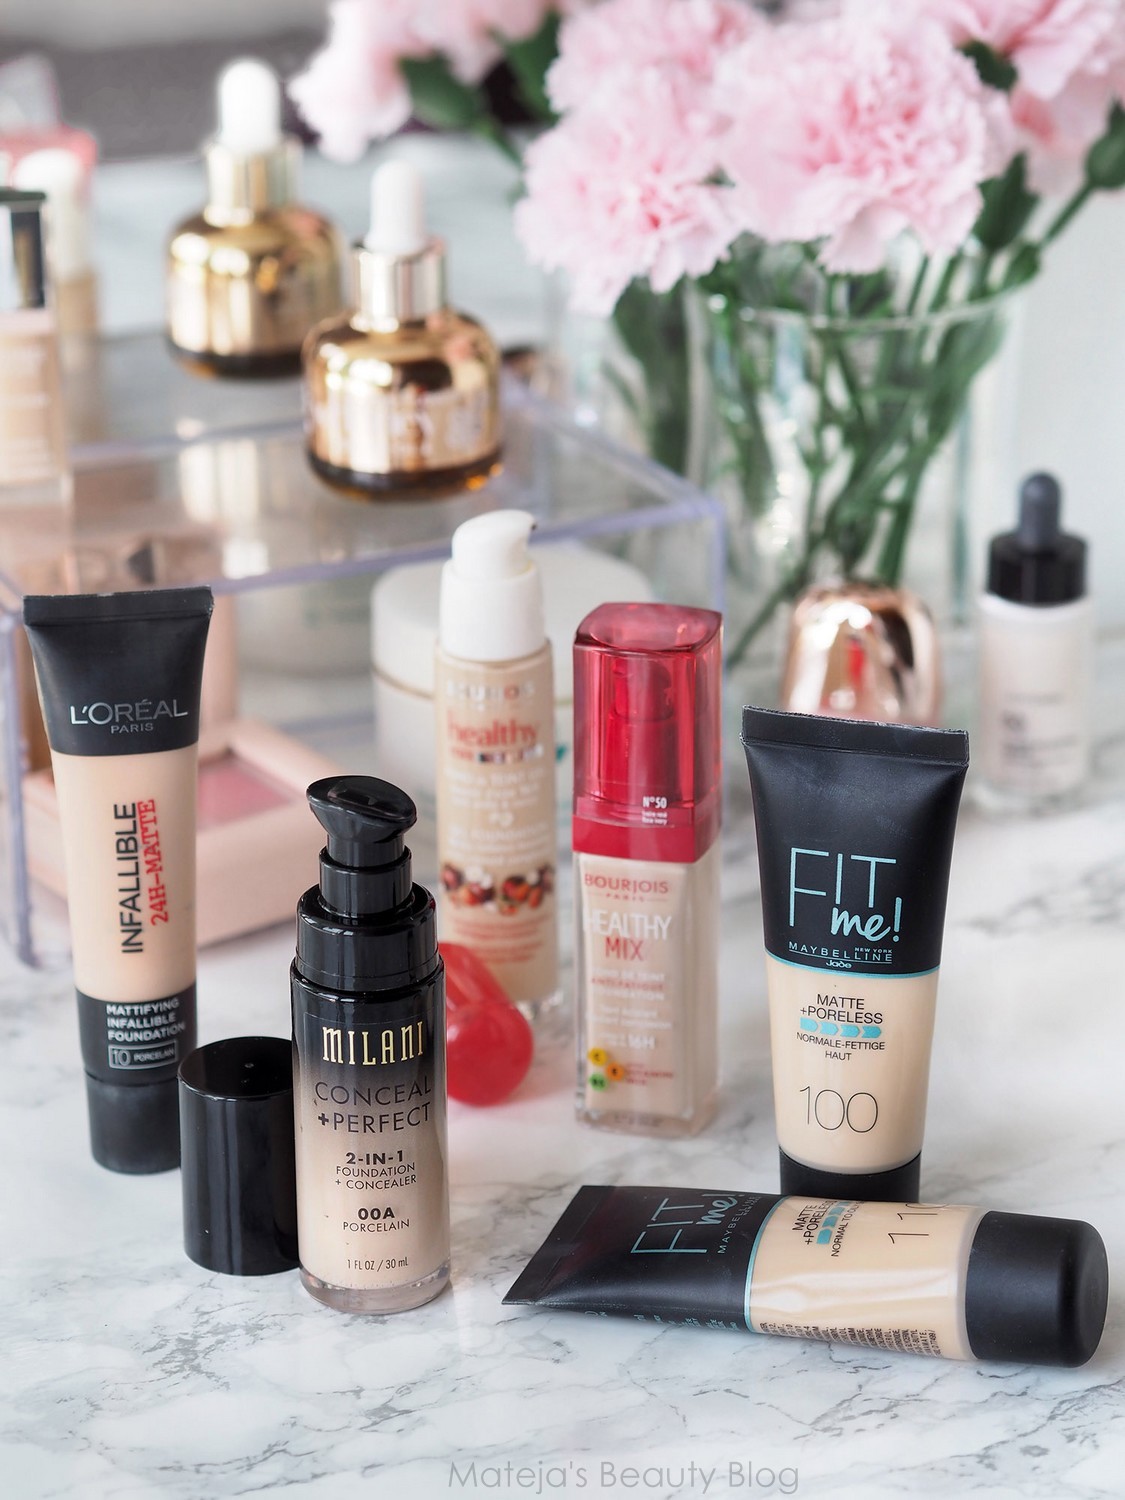 My Top 5 Foundations